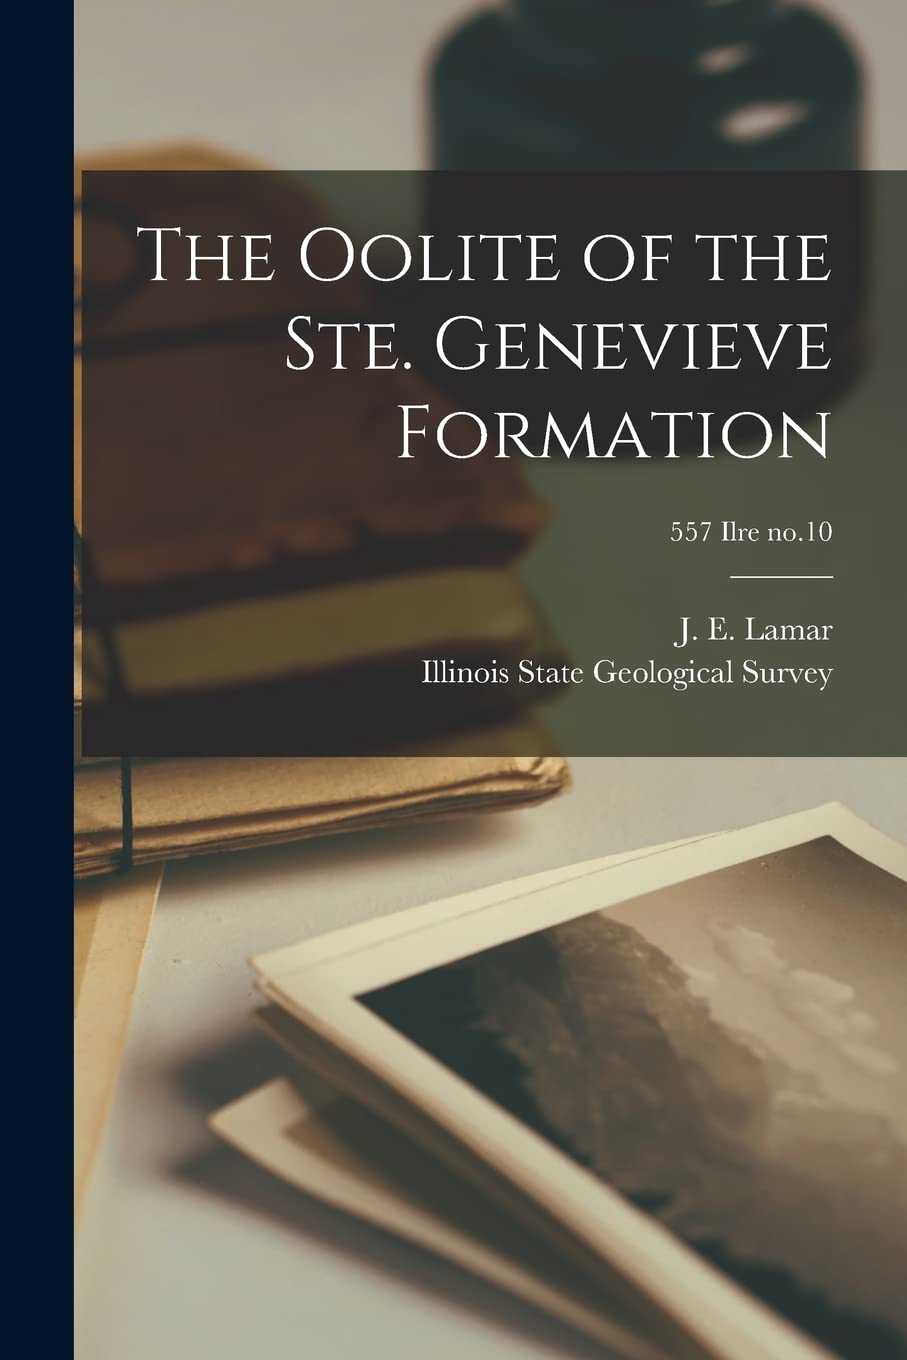 The Oolite of the Ste